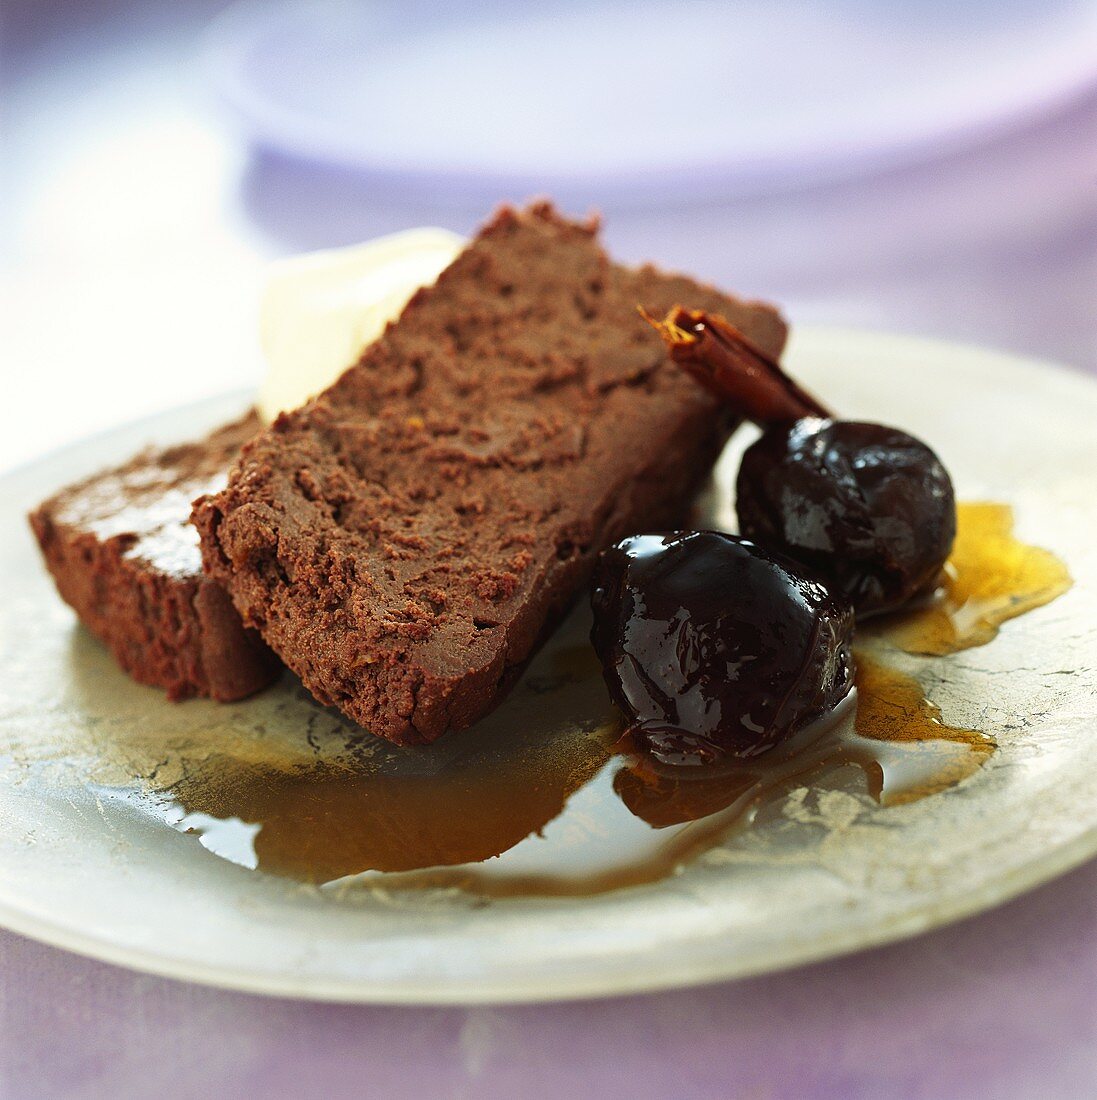 Chocolate mousse with honey sauce